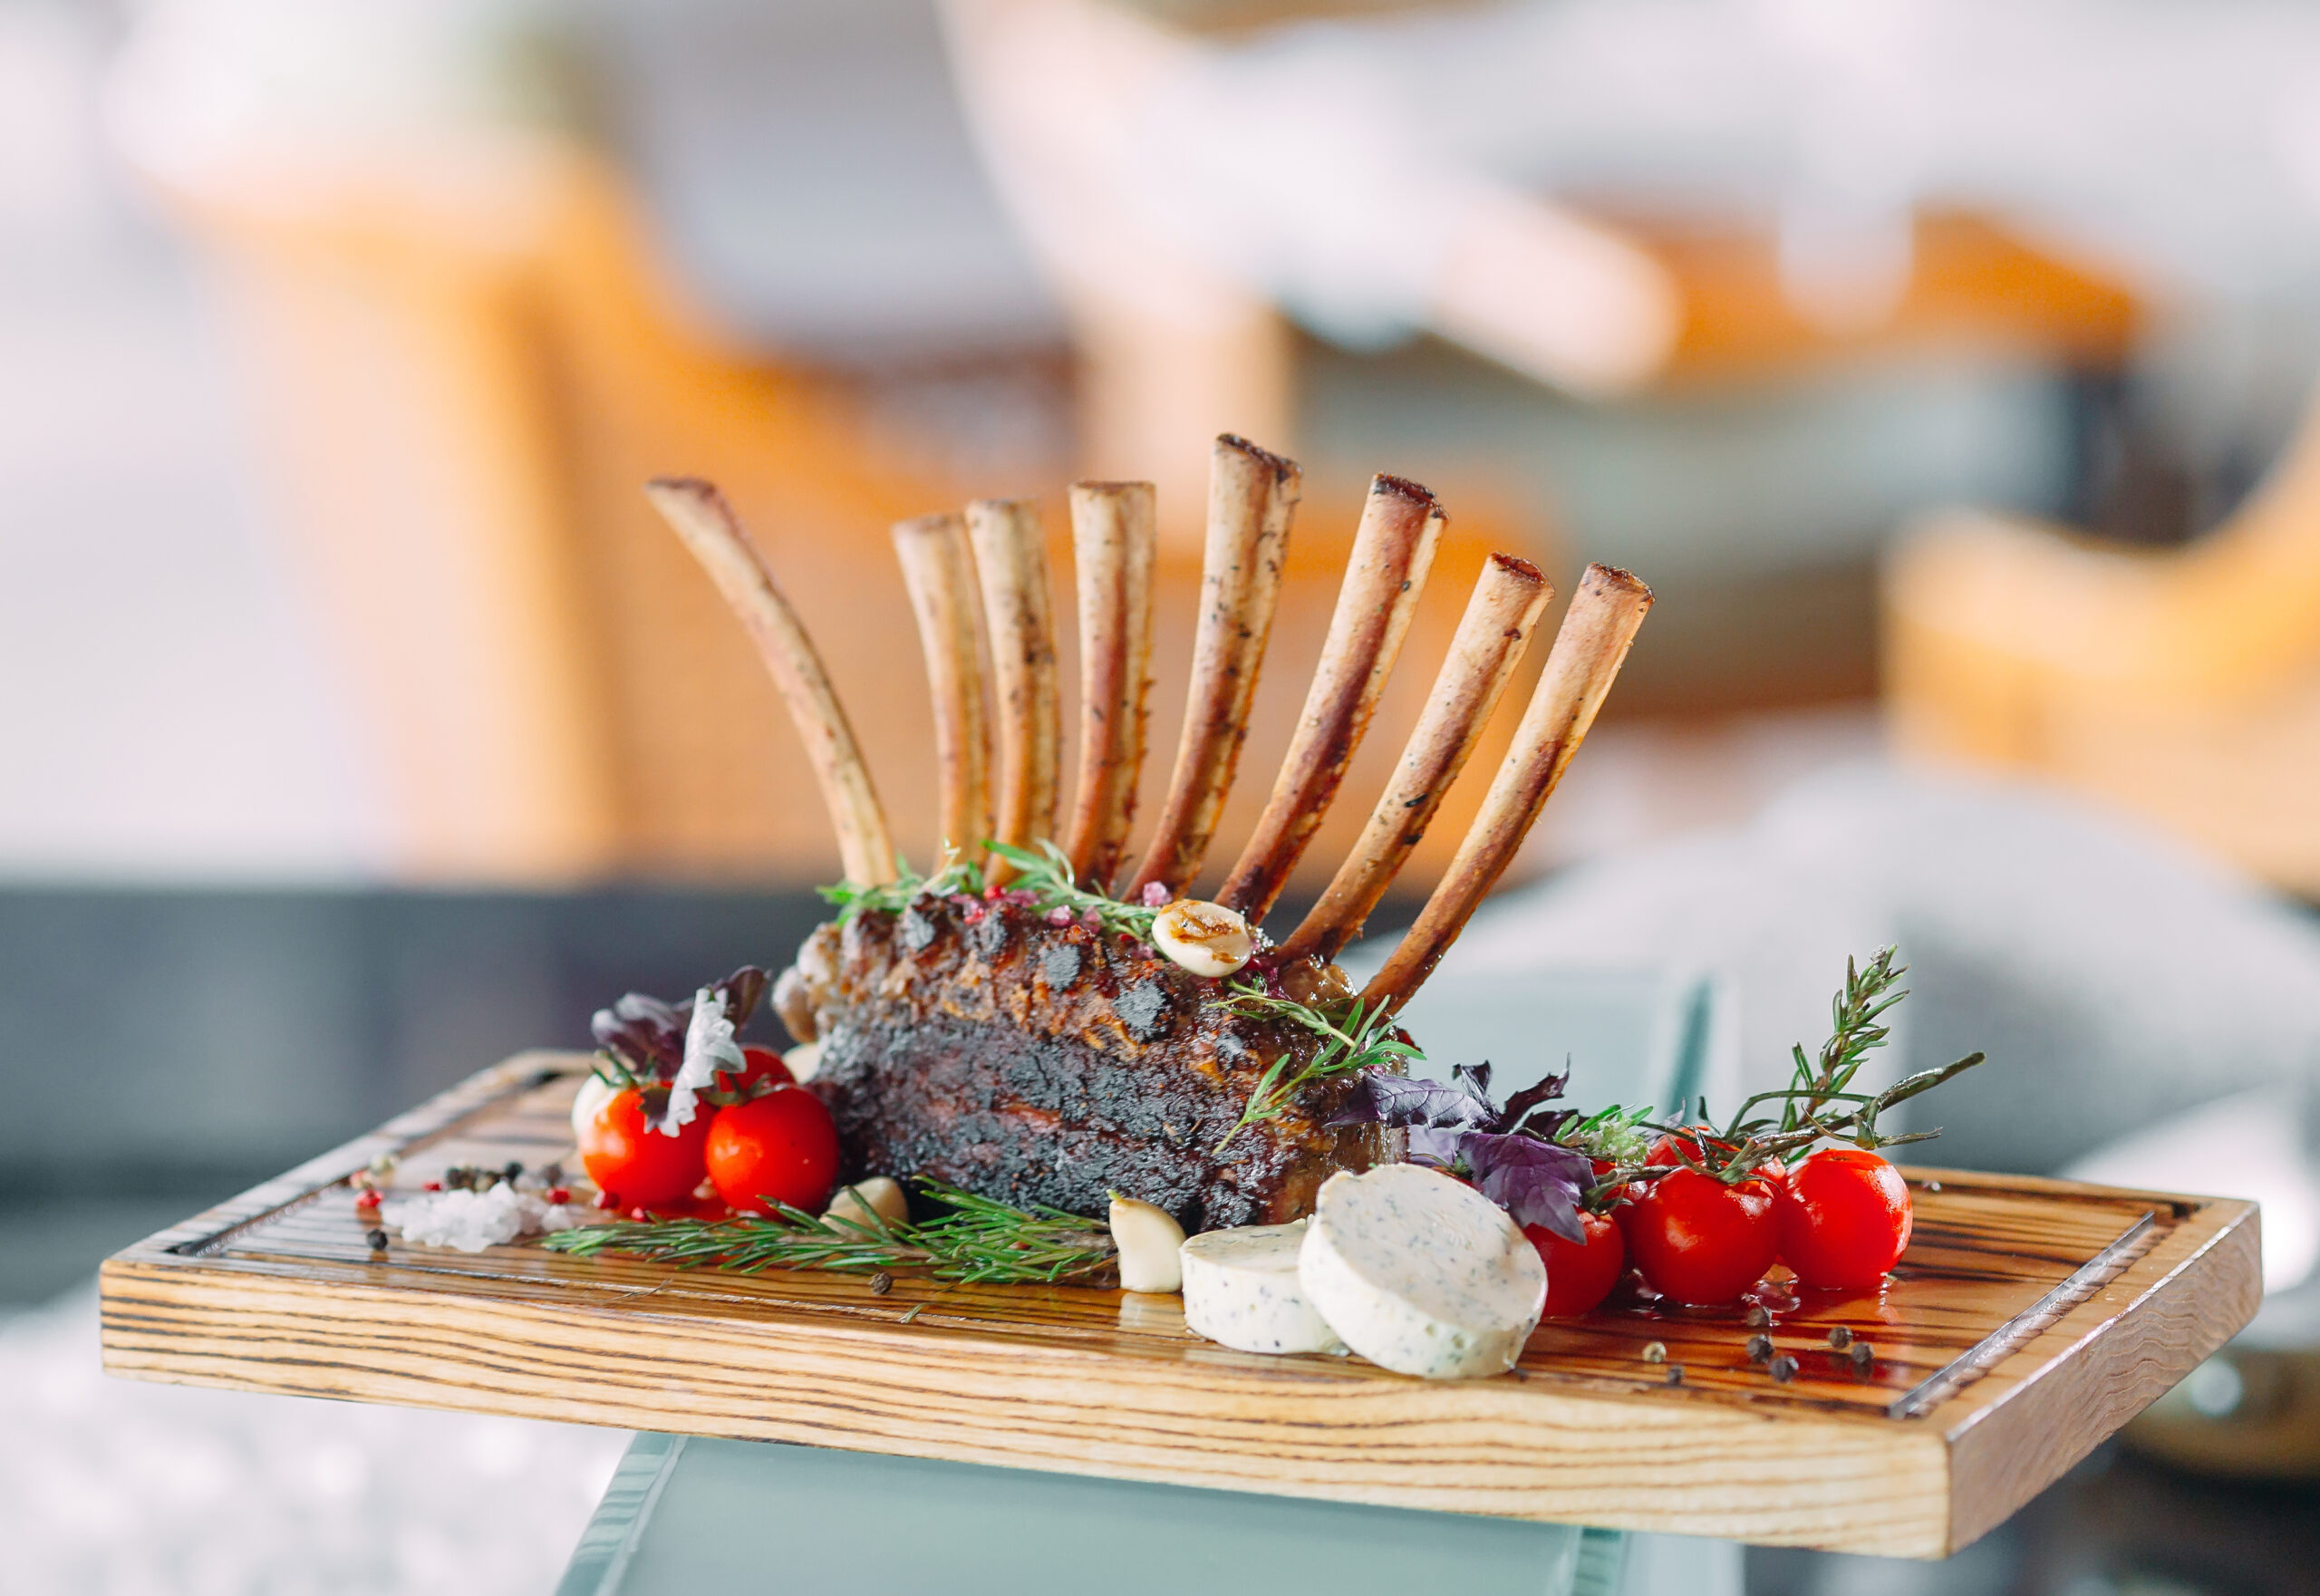 Dish Rack of Lamb with tomatoes on a wooden tray